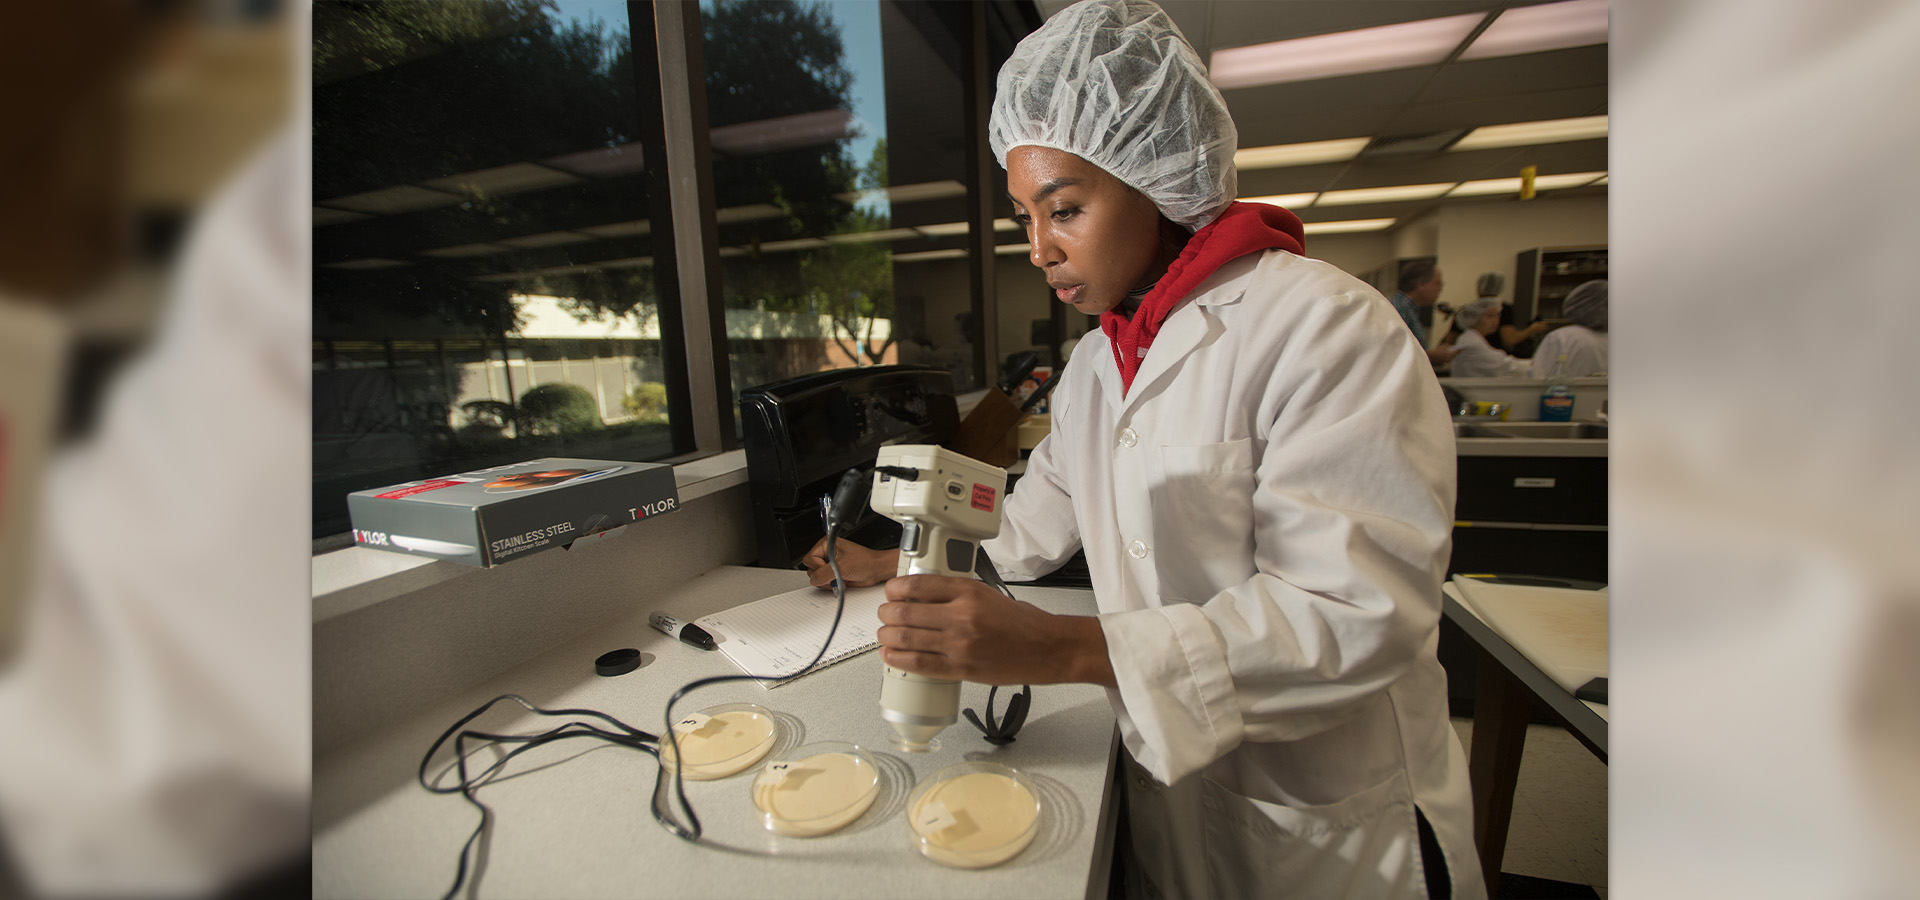 A students works in one of the food science labs